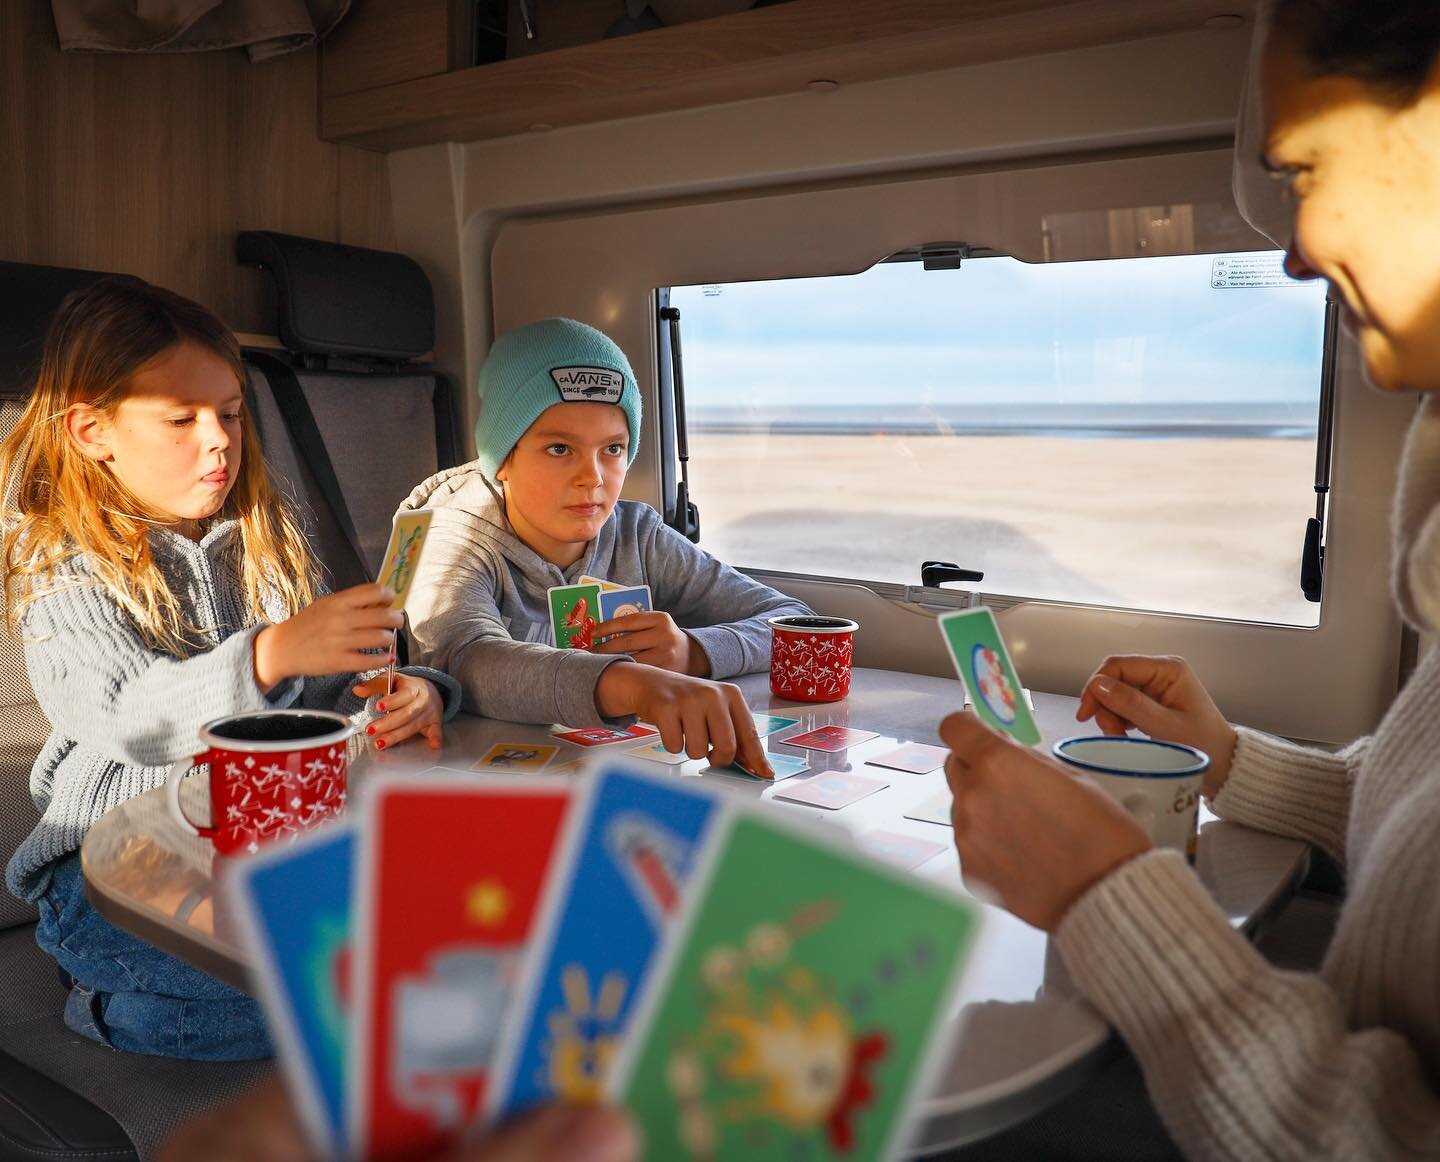 Let us present to you: the very last moments of our camper adventure. After our refreshing (ok ice cold 😁!) morning walk on the beach, we decided to warm up while playing the #stapvoorstap game, @colruytgroup provided us with (there&rsquo;s never a 